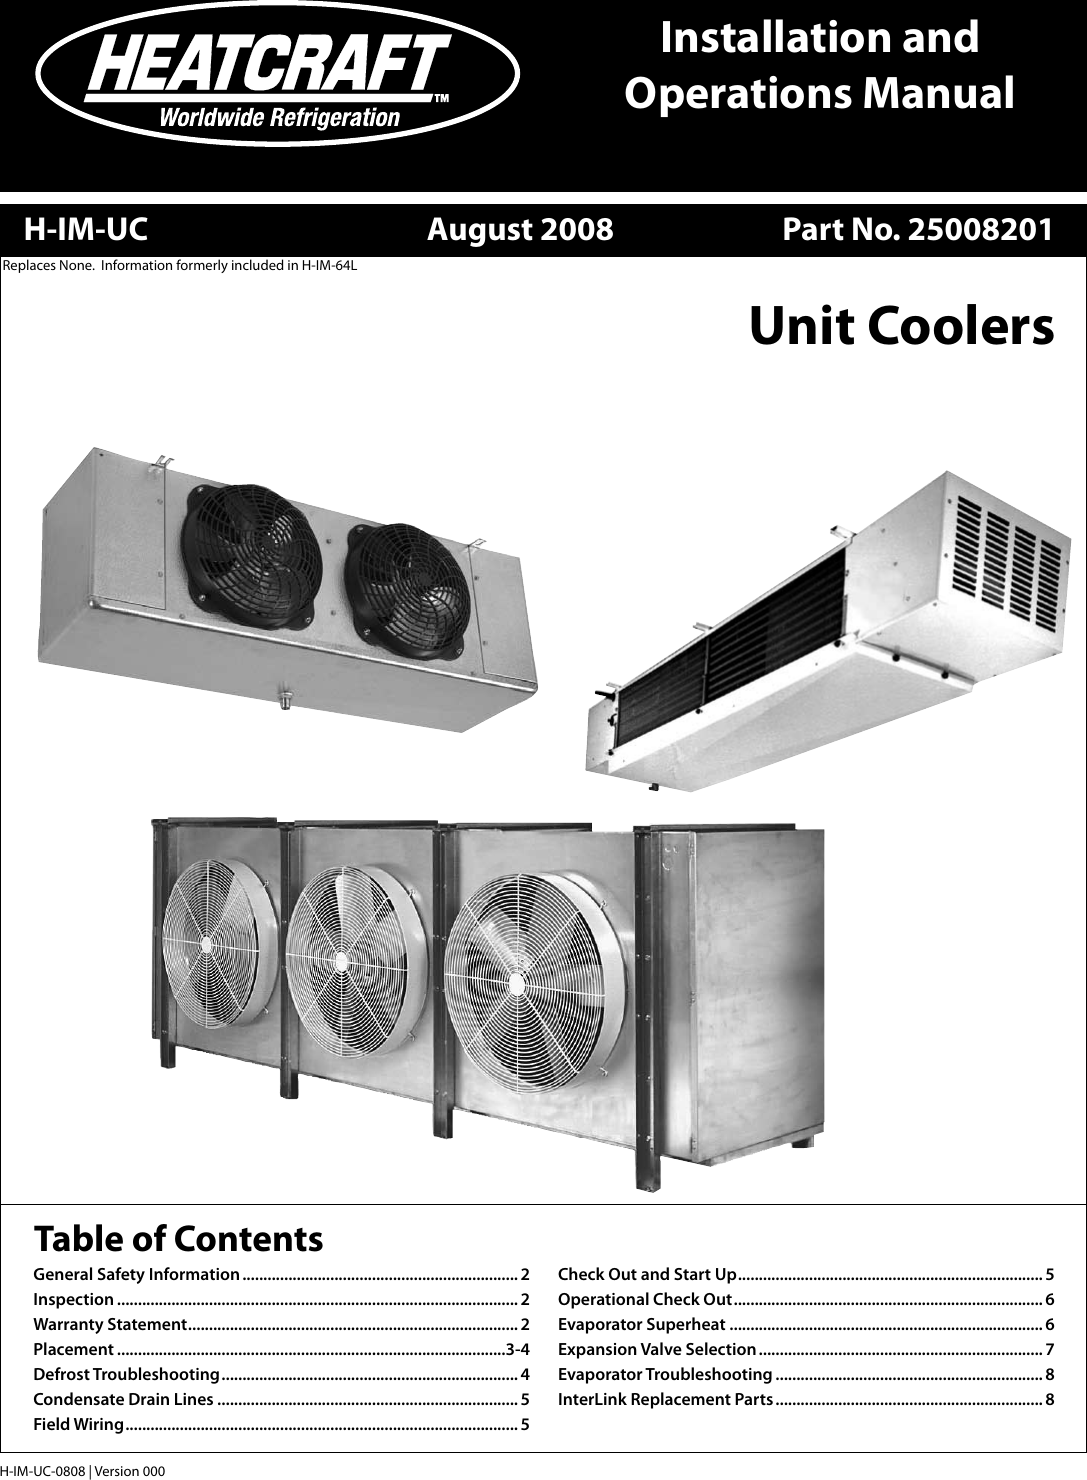 Page 1 of 8 - Heatcraft-Refrigeration-Products Heatcraft-Refrigeration-Products-Unit-Coolers-H-Im-Uc-Users-Manual-  Heatcraft-refrigeration-products-unit-coolers-h-im-uc-users-manual